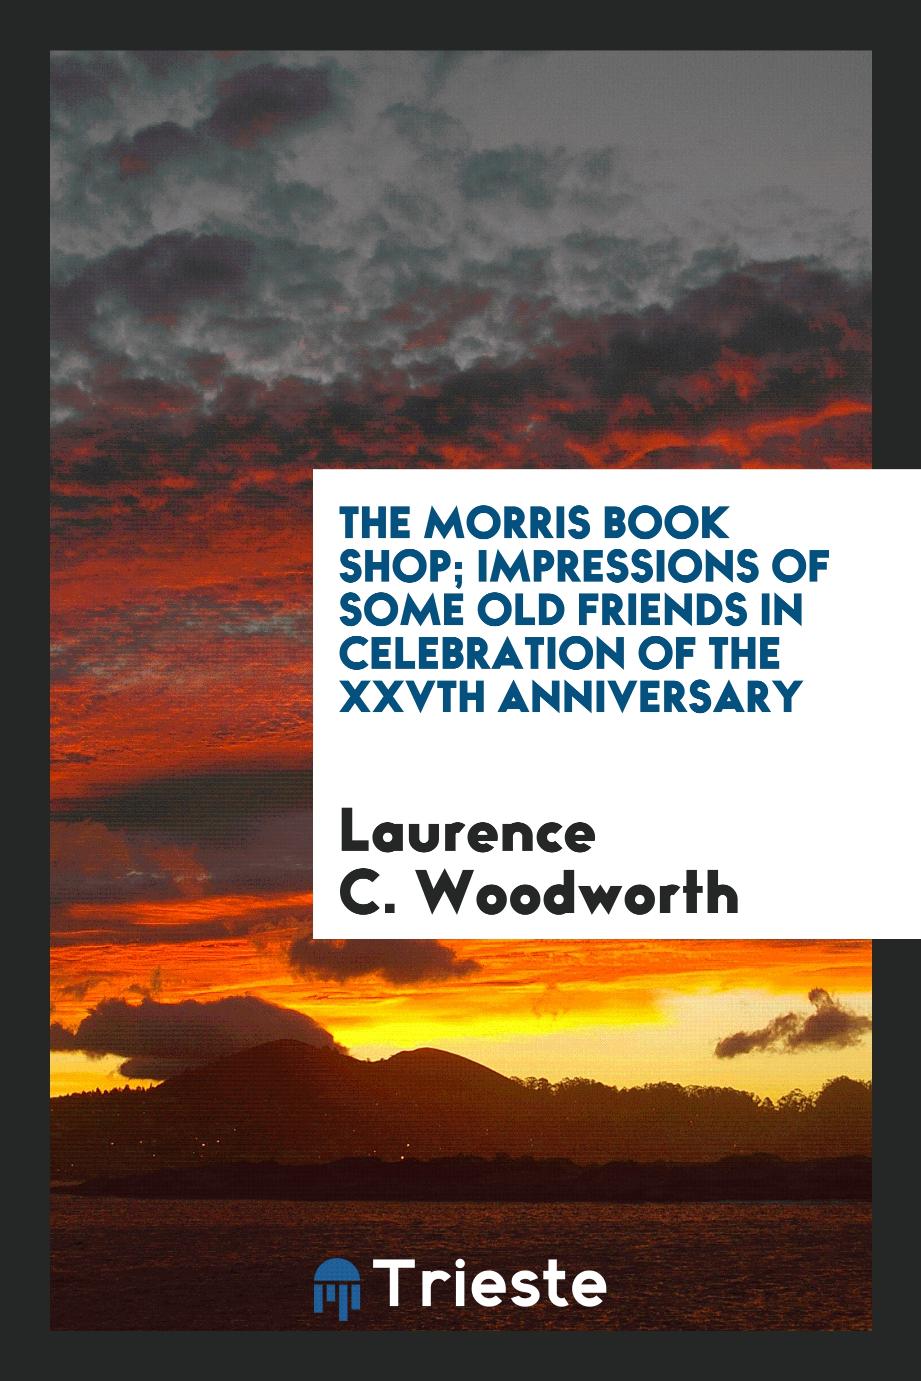 The Morris book shop; impressions of some old friends in celebration of the XXVth anniversary